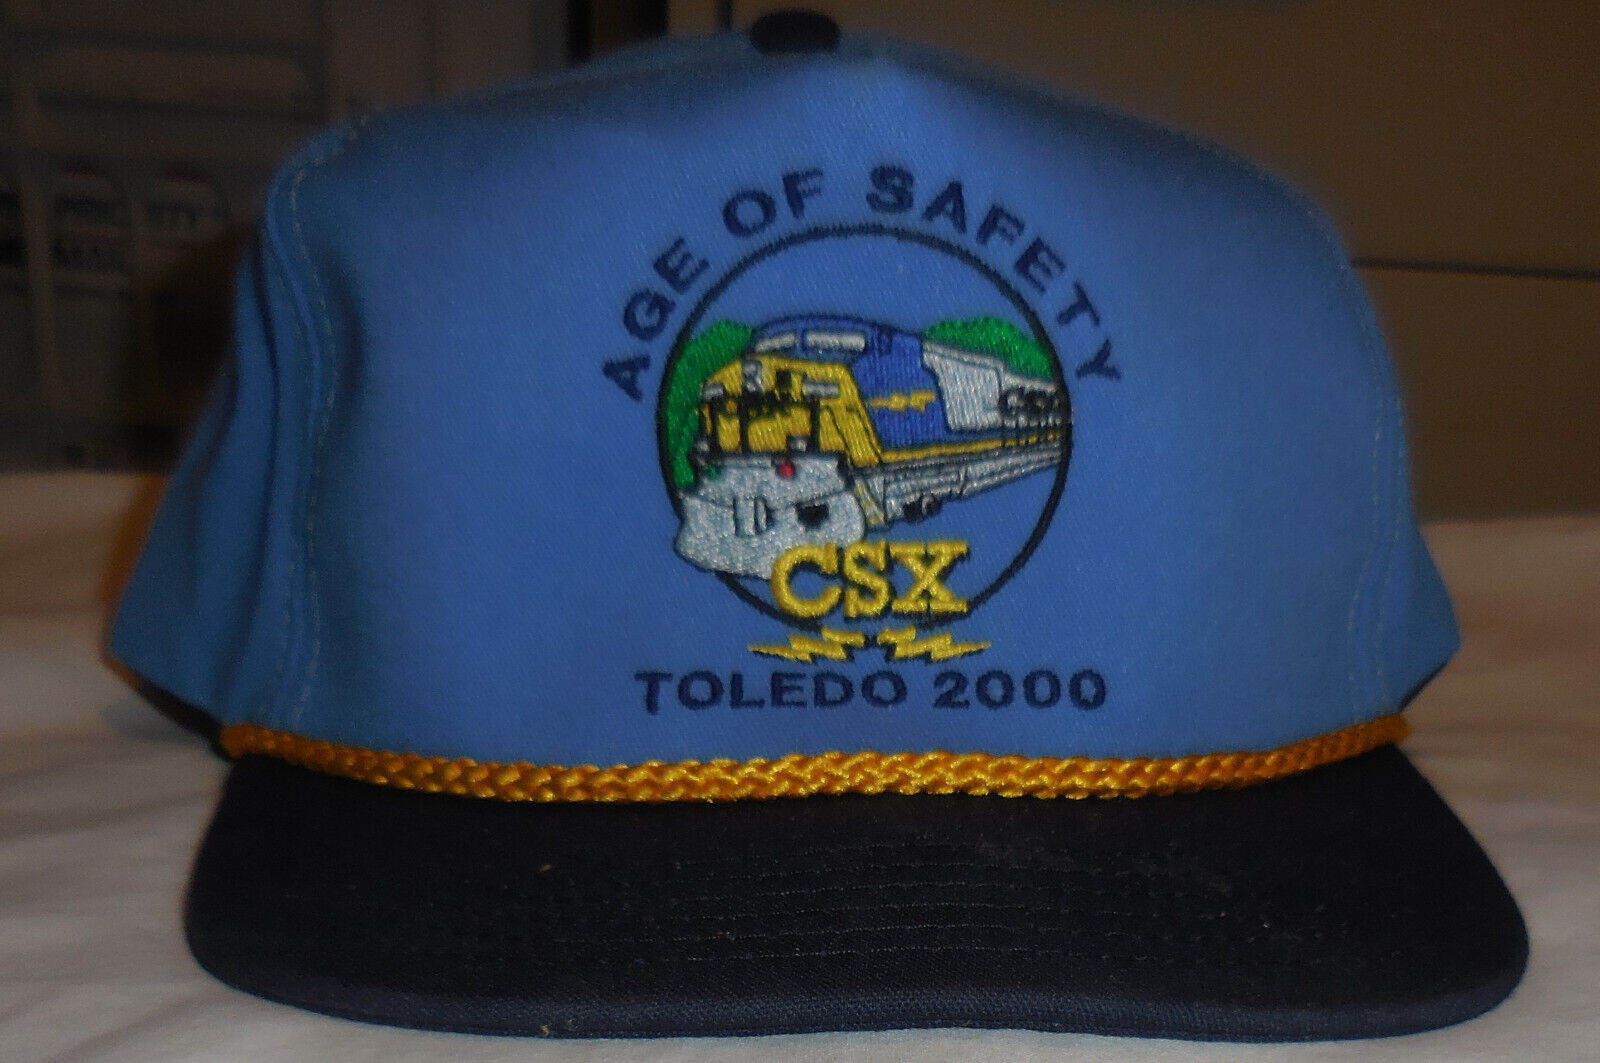 1 CSX Toledo Ohio 2000 Age Of Safety Hat cap Adjustable made in USA